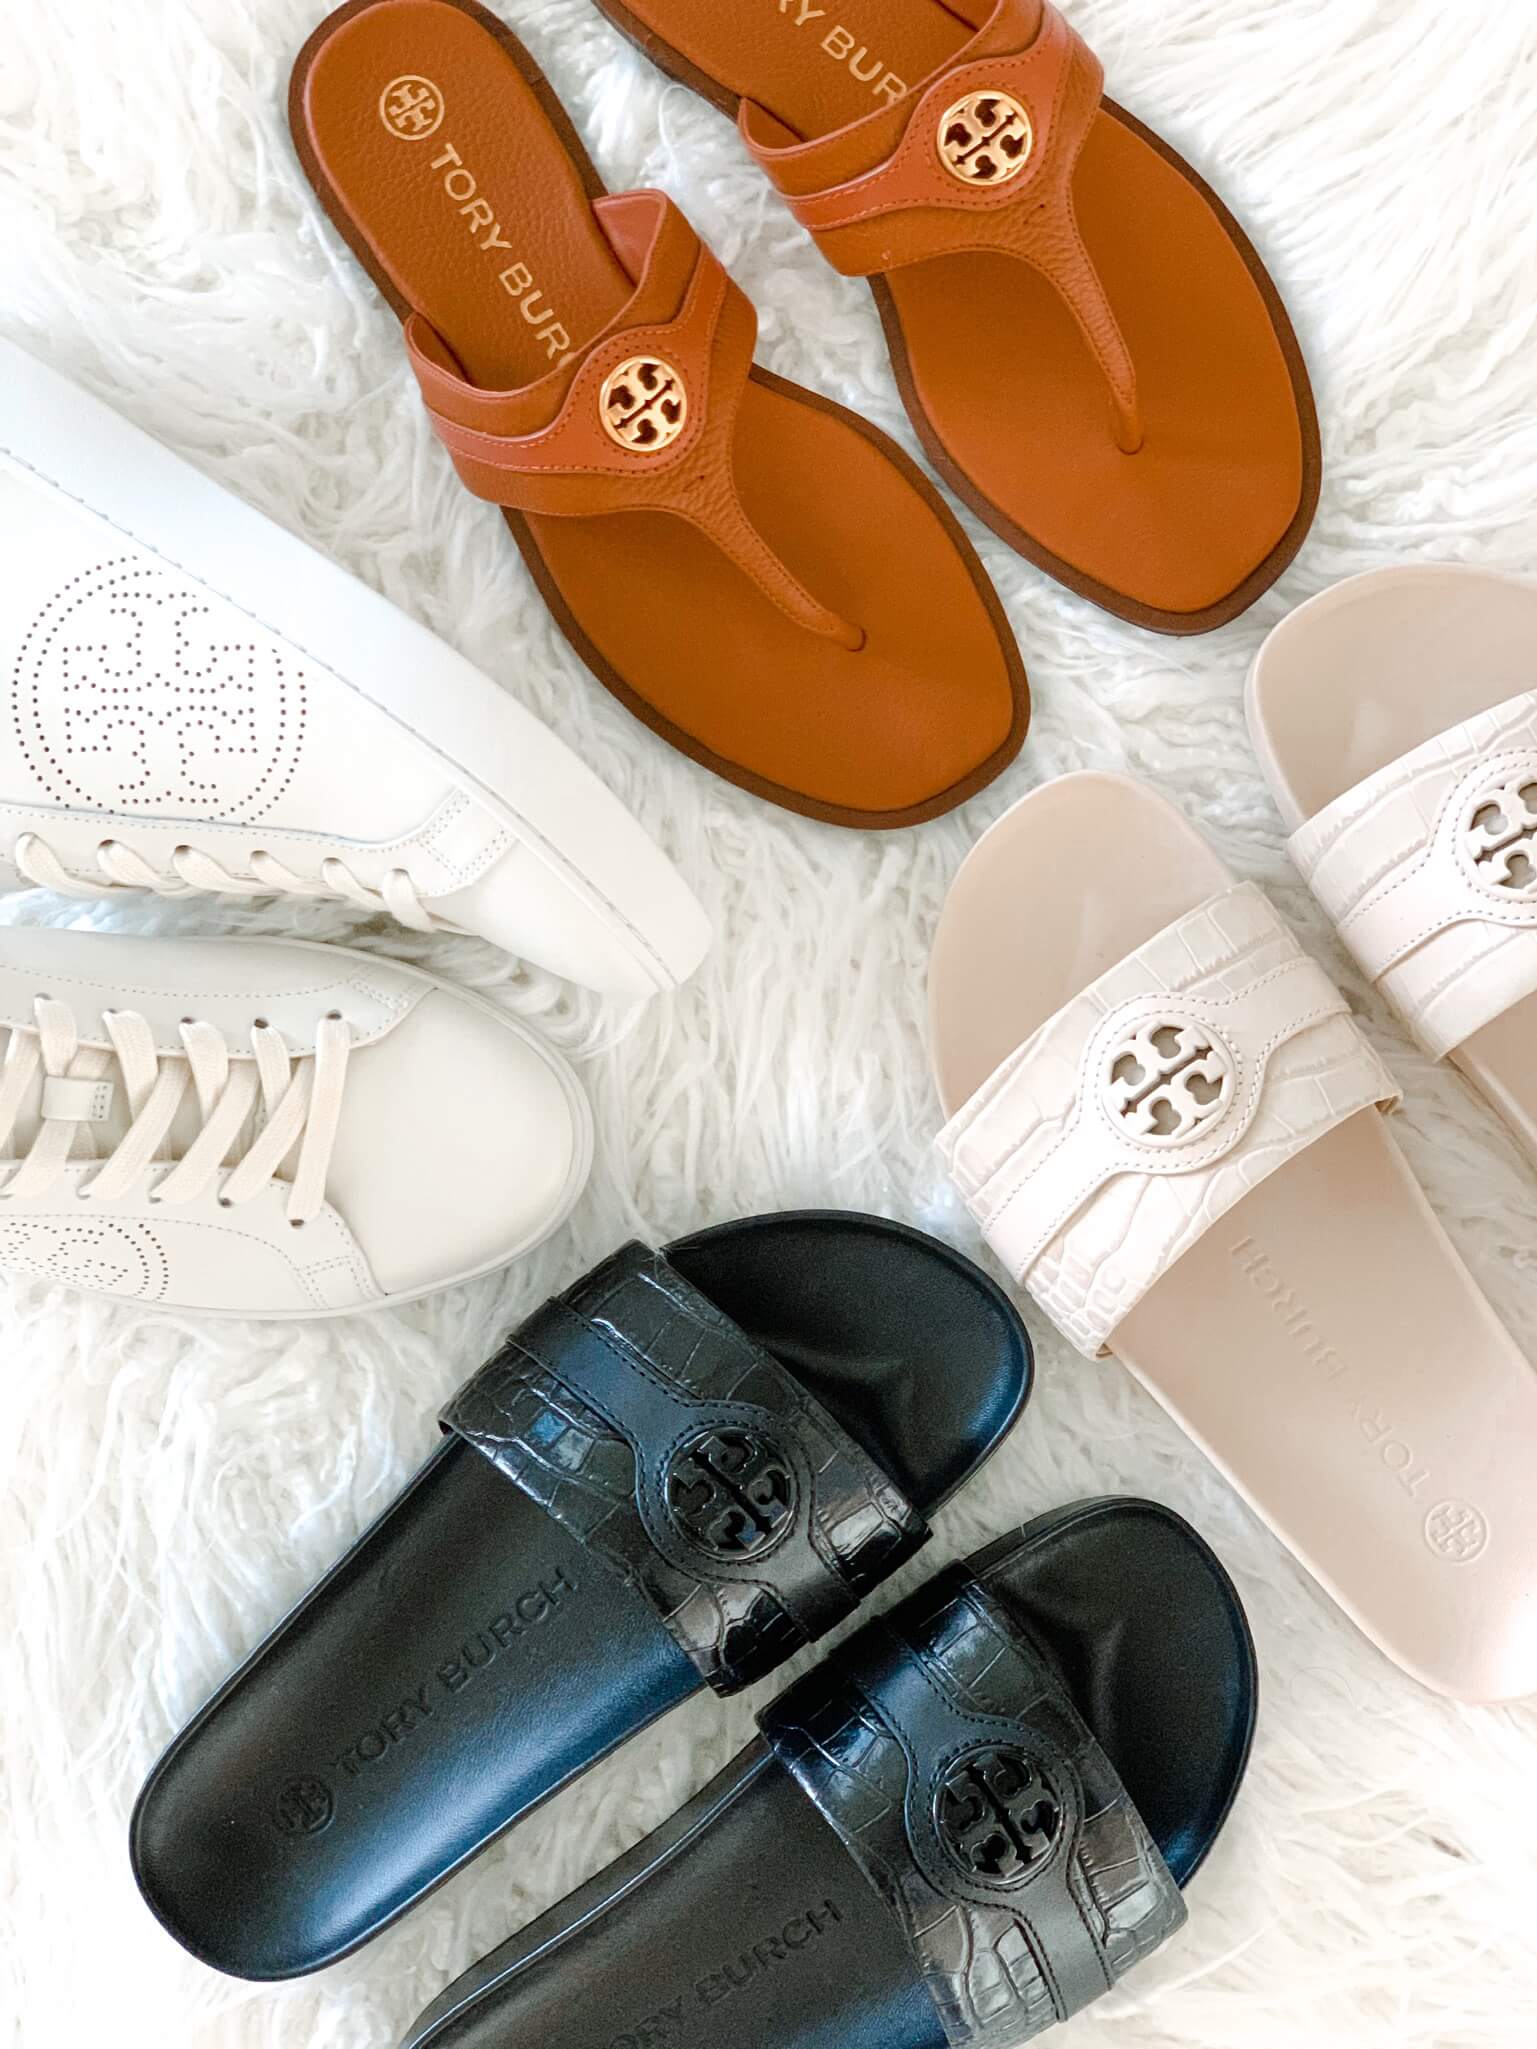 New Tory Burch Markdowns | Up To 40% Off + FREE Shipping! - The Double Take  Girls